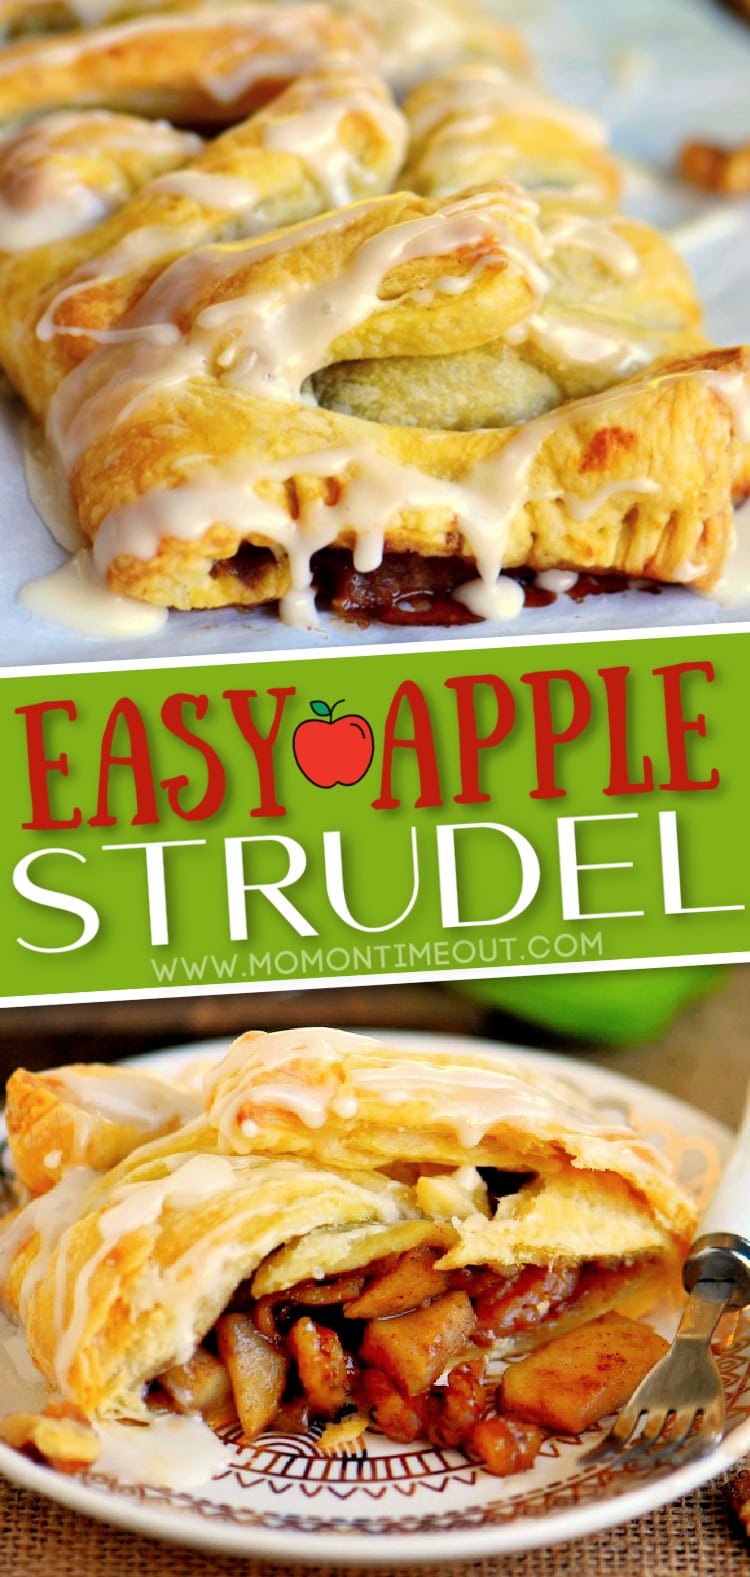 Easy Apple Strudel - Mom On Timeout